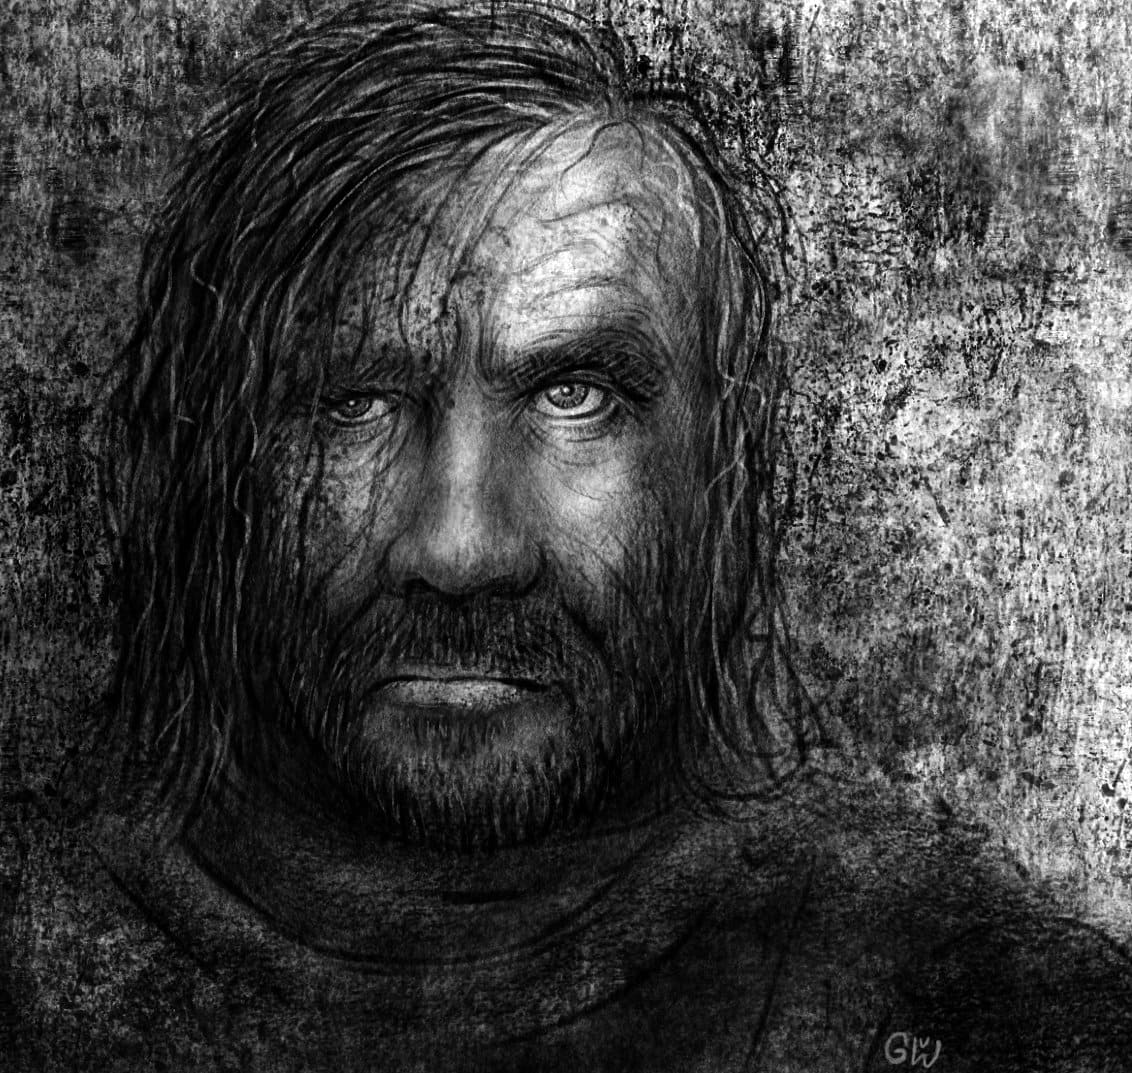 An image of a tormented man with a lively look drawn with pencils.